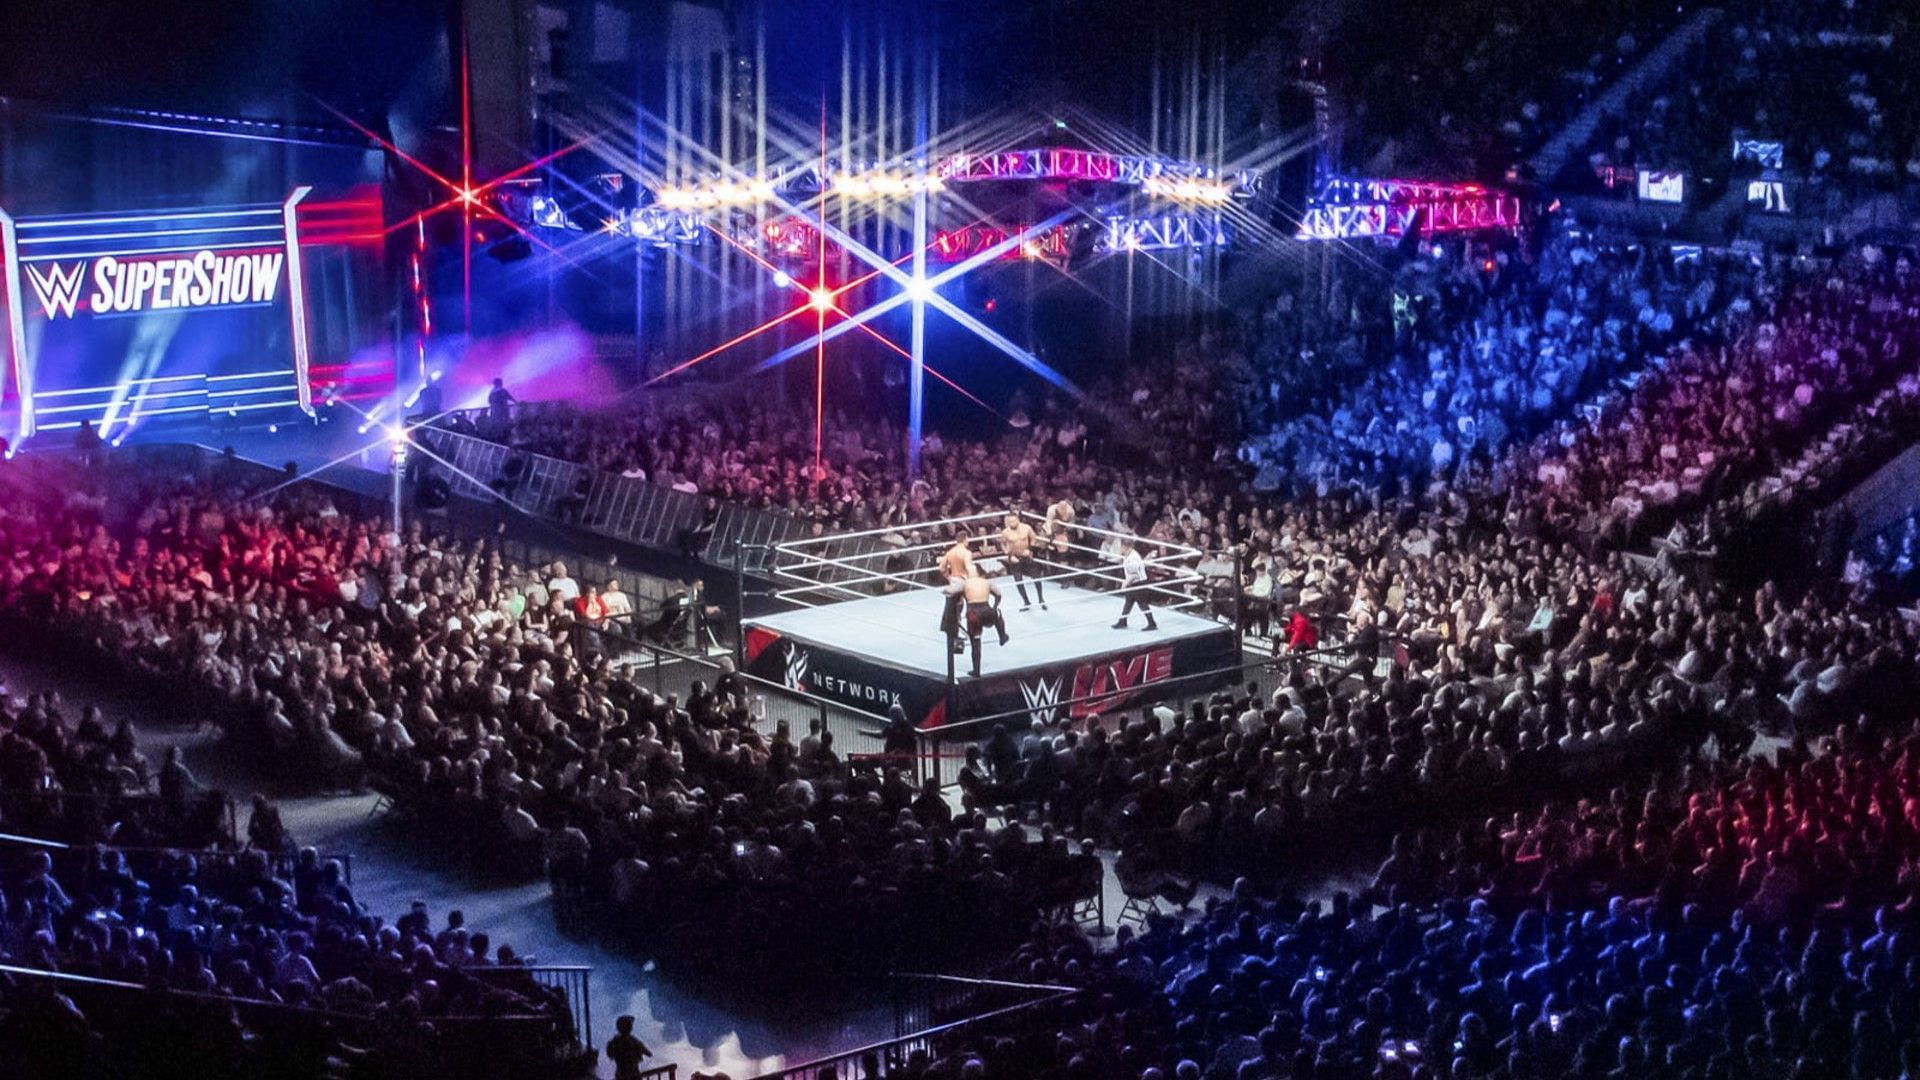 The WWE Universe packs local arena for live event in Vienna